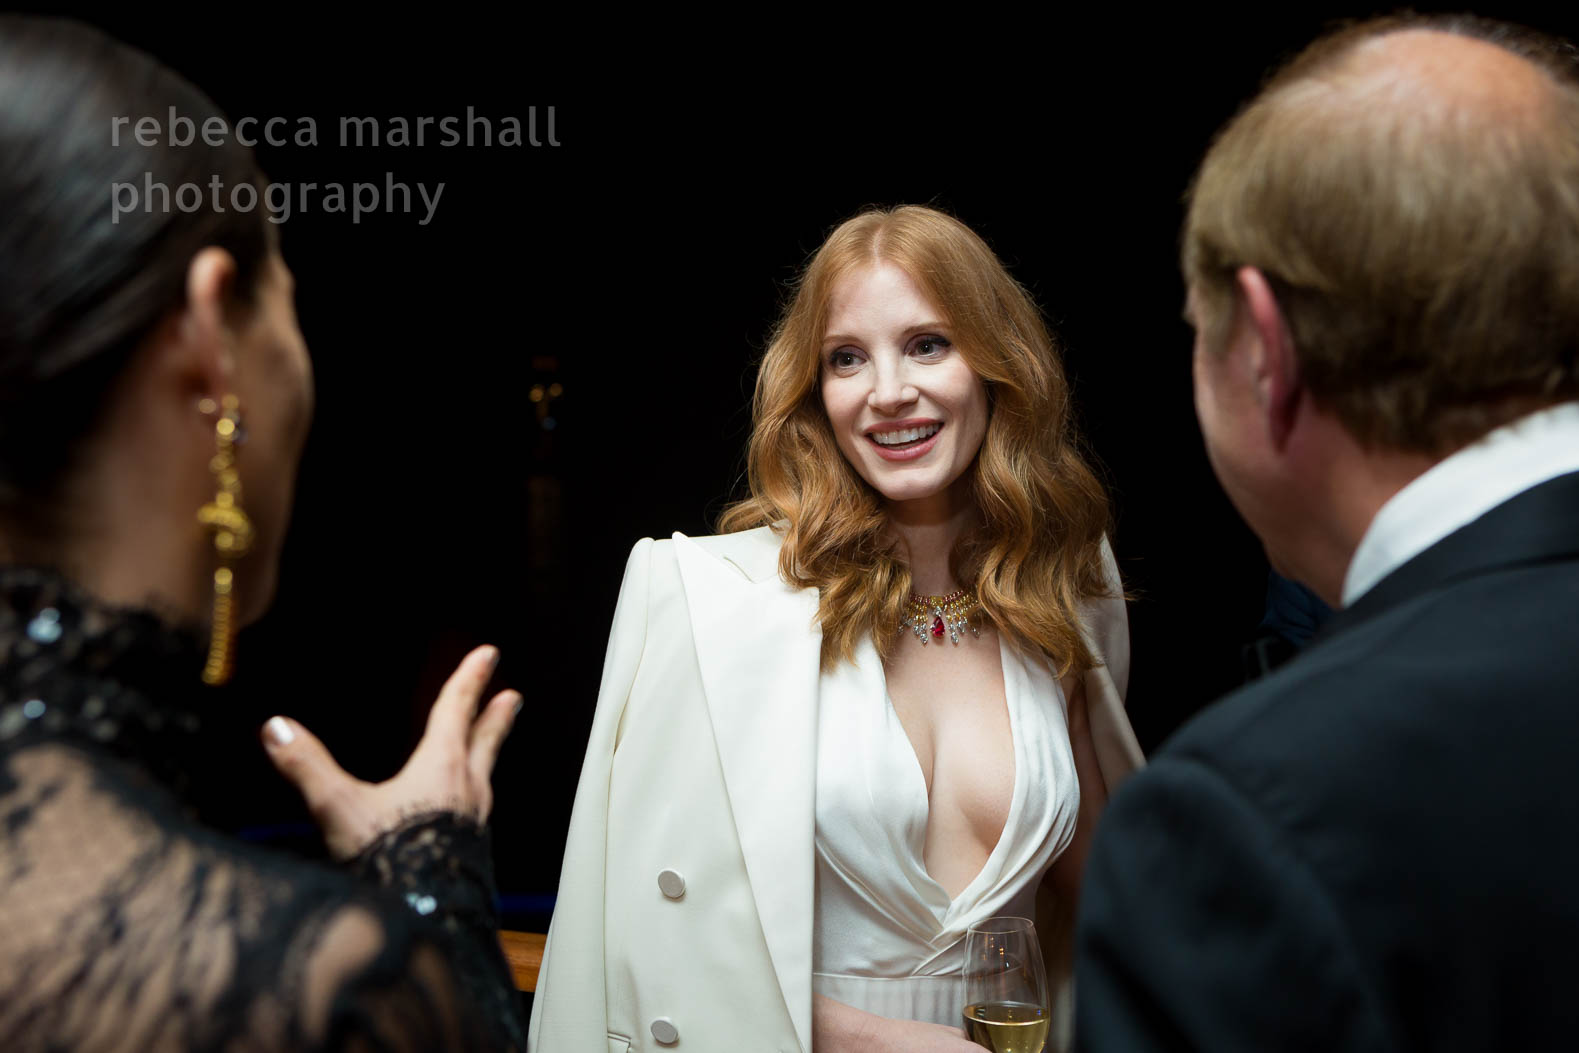 Photograph of Jessica Chastain, in a white dress, talking at a party